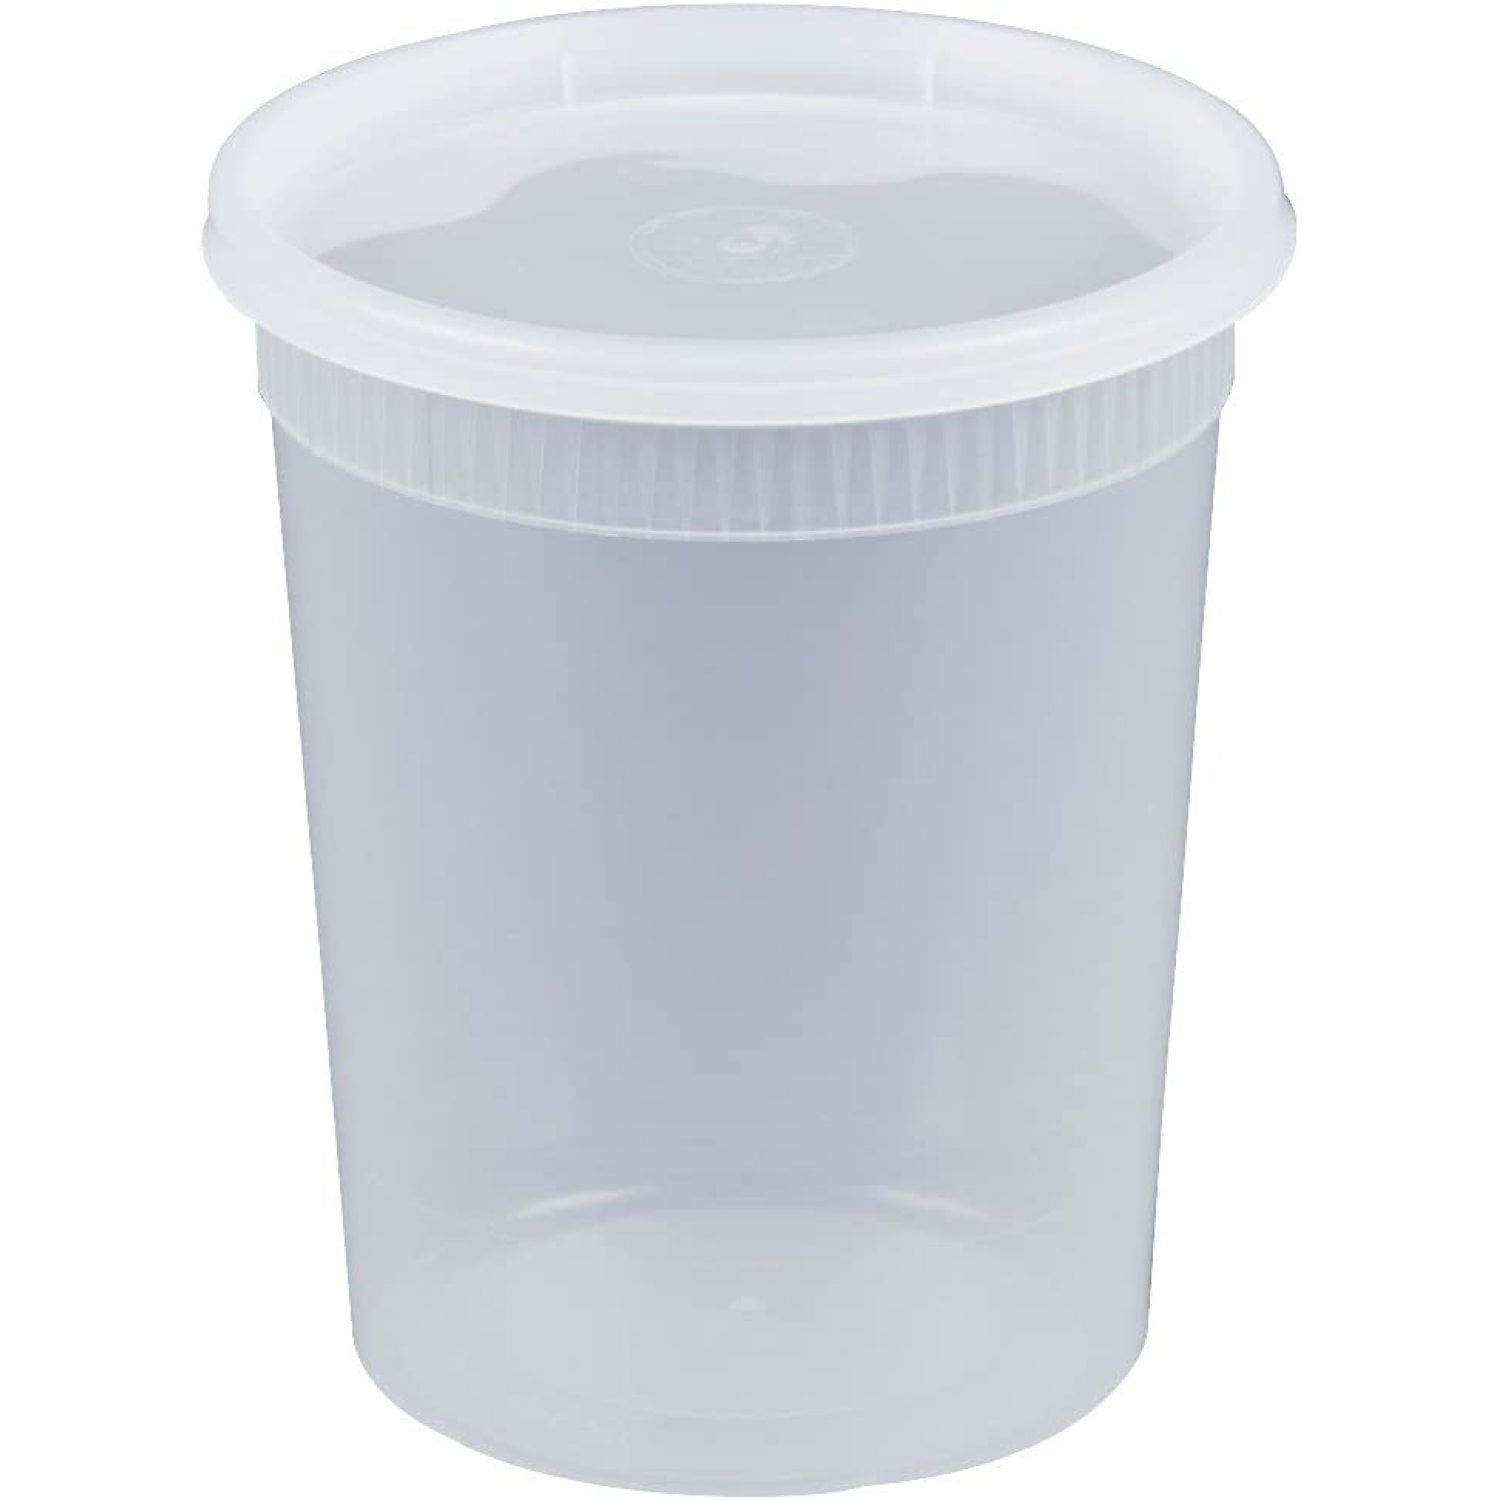 32 oz Deli Containers with Lids 240 Bulk Pack – Plastic Quart Container with Lid Disposable 32oz Freezer Soup & Food Storage Tall Large Container 32